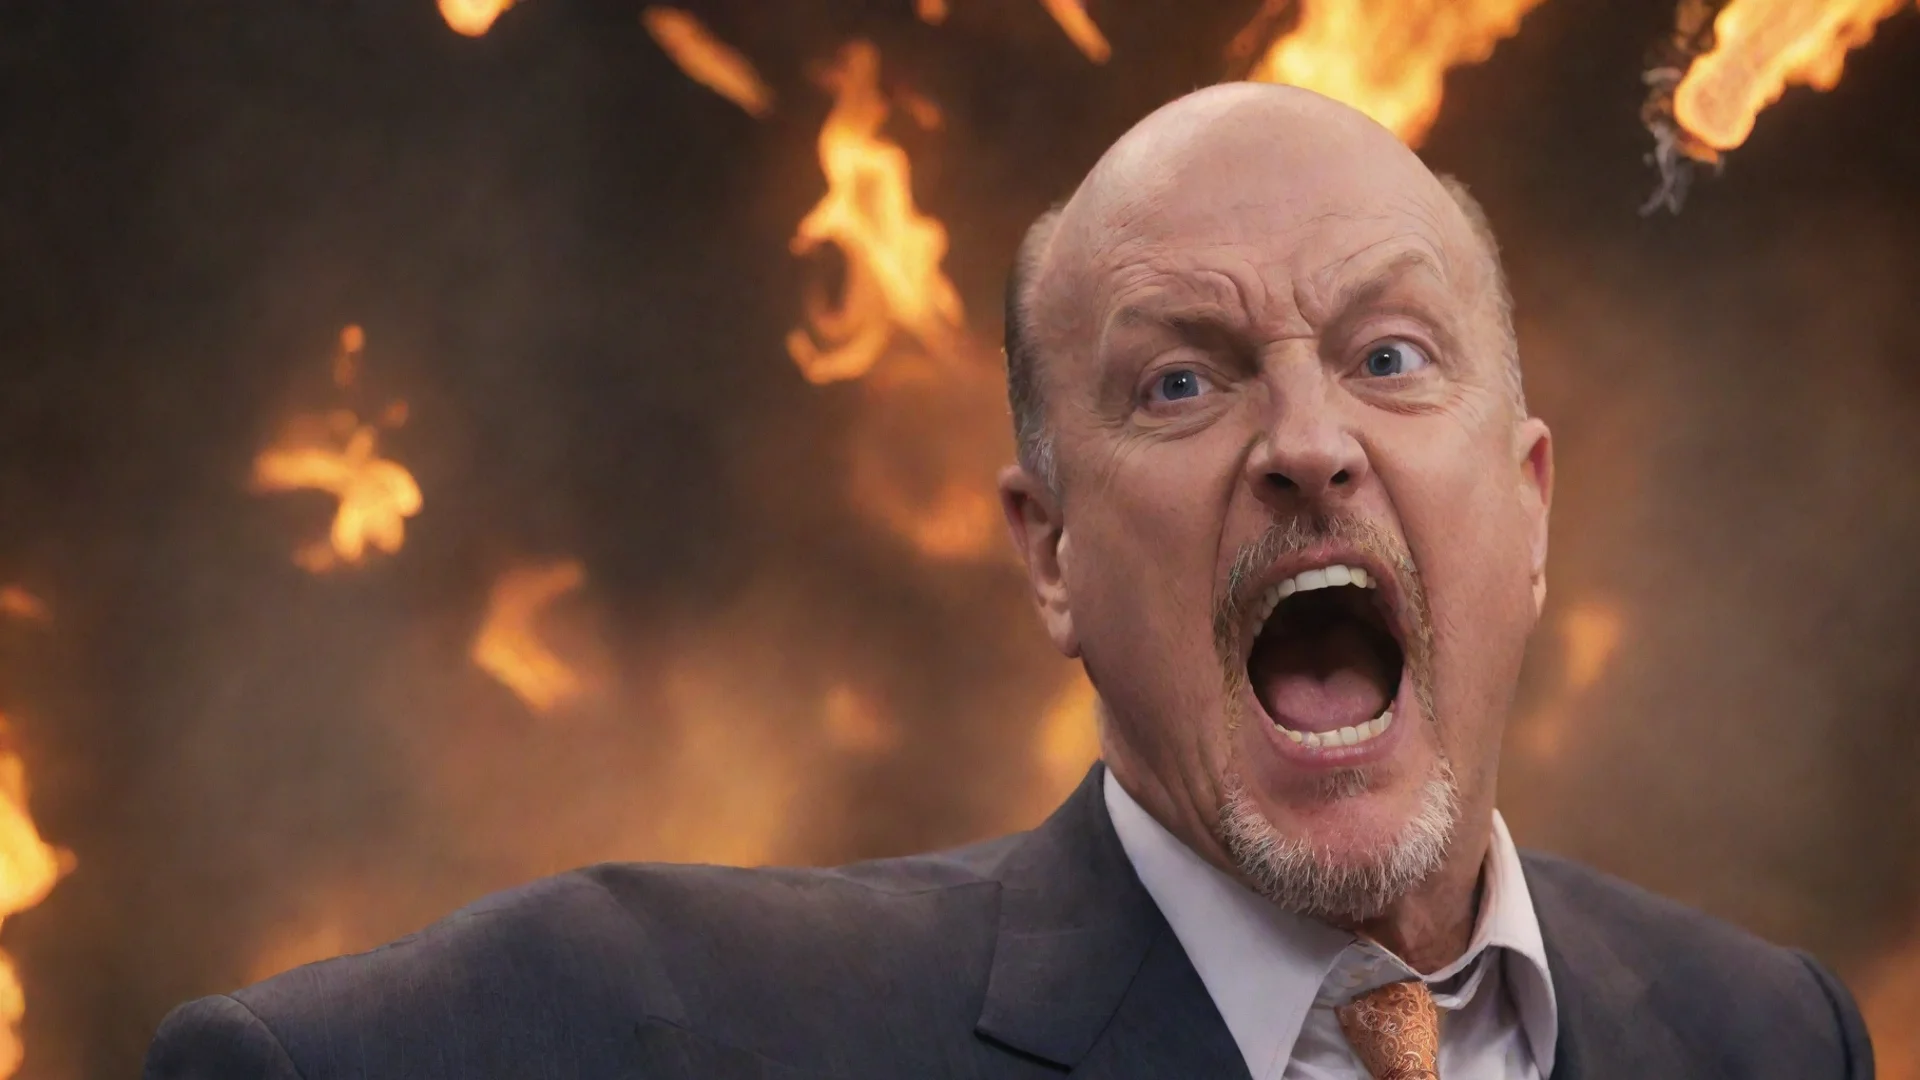 aiamazing jim cramer screaming at a blazing bitcoin awesome portrait 2 wide